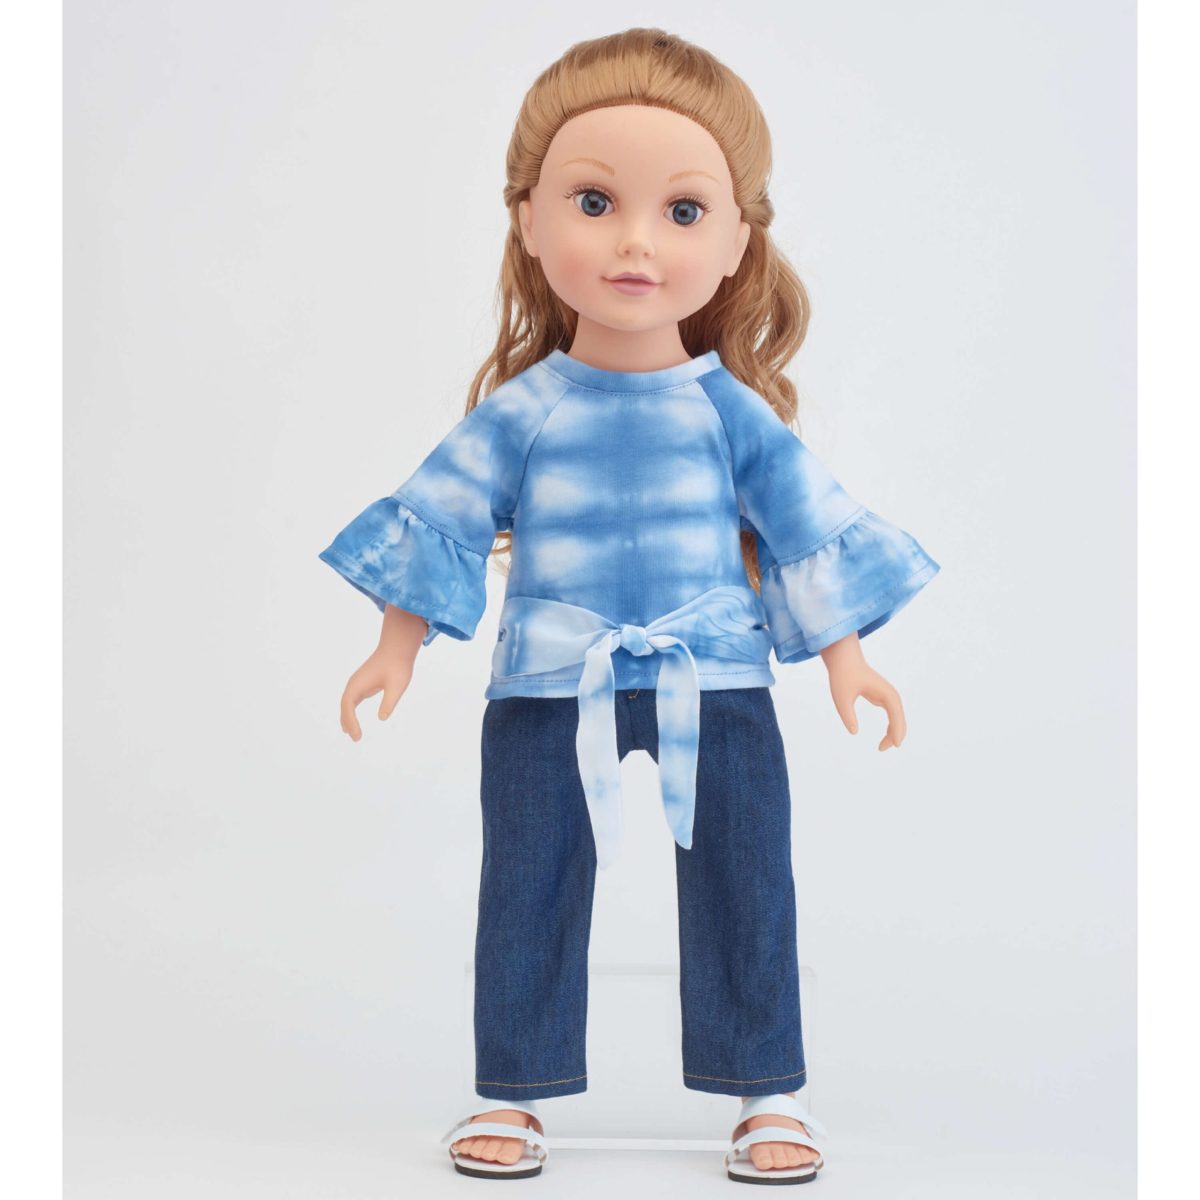 Simplicity Sewing Pattern S9499 18" Doll Clothes